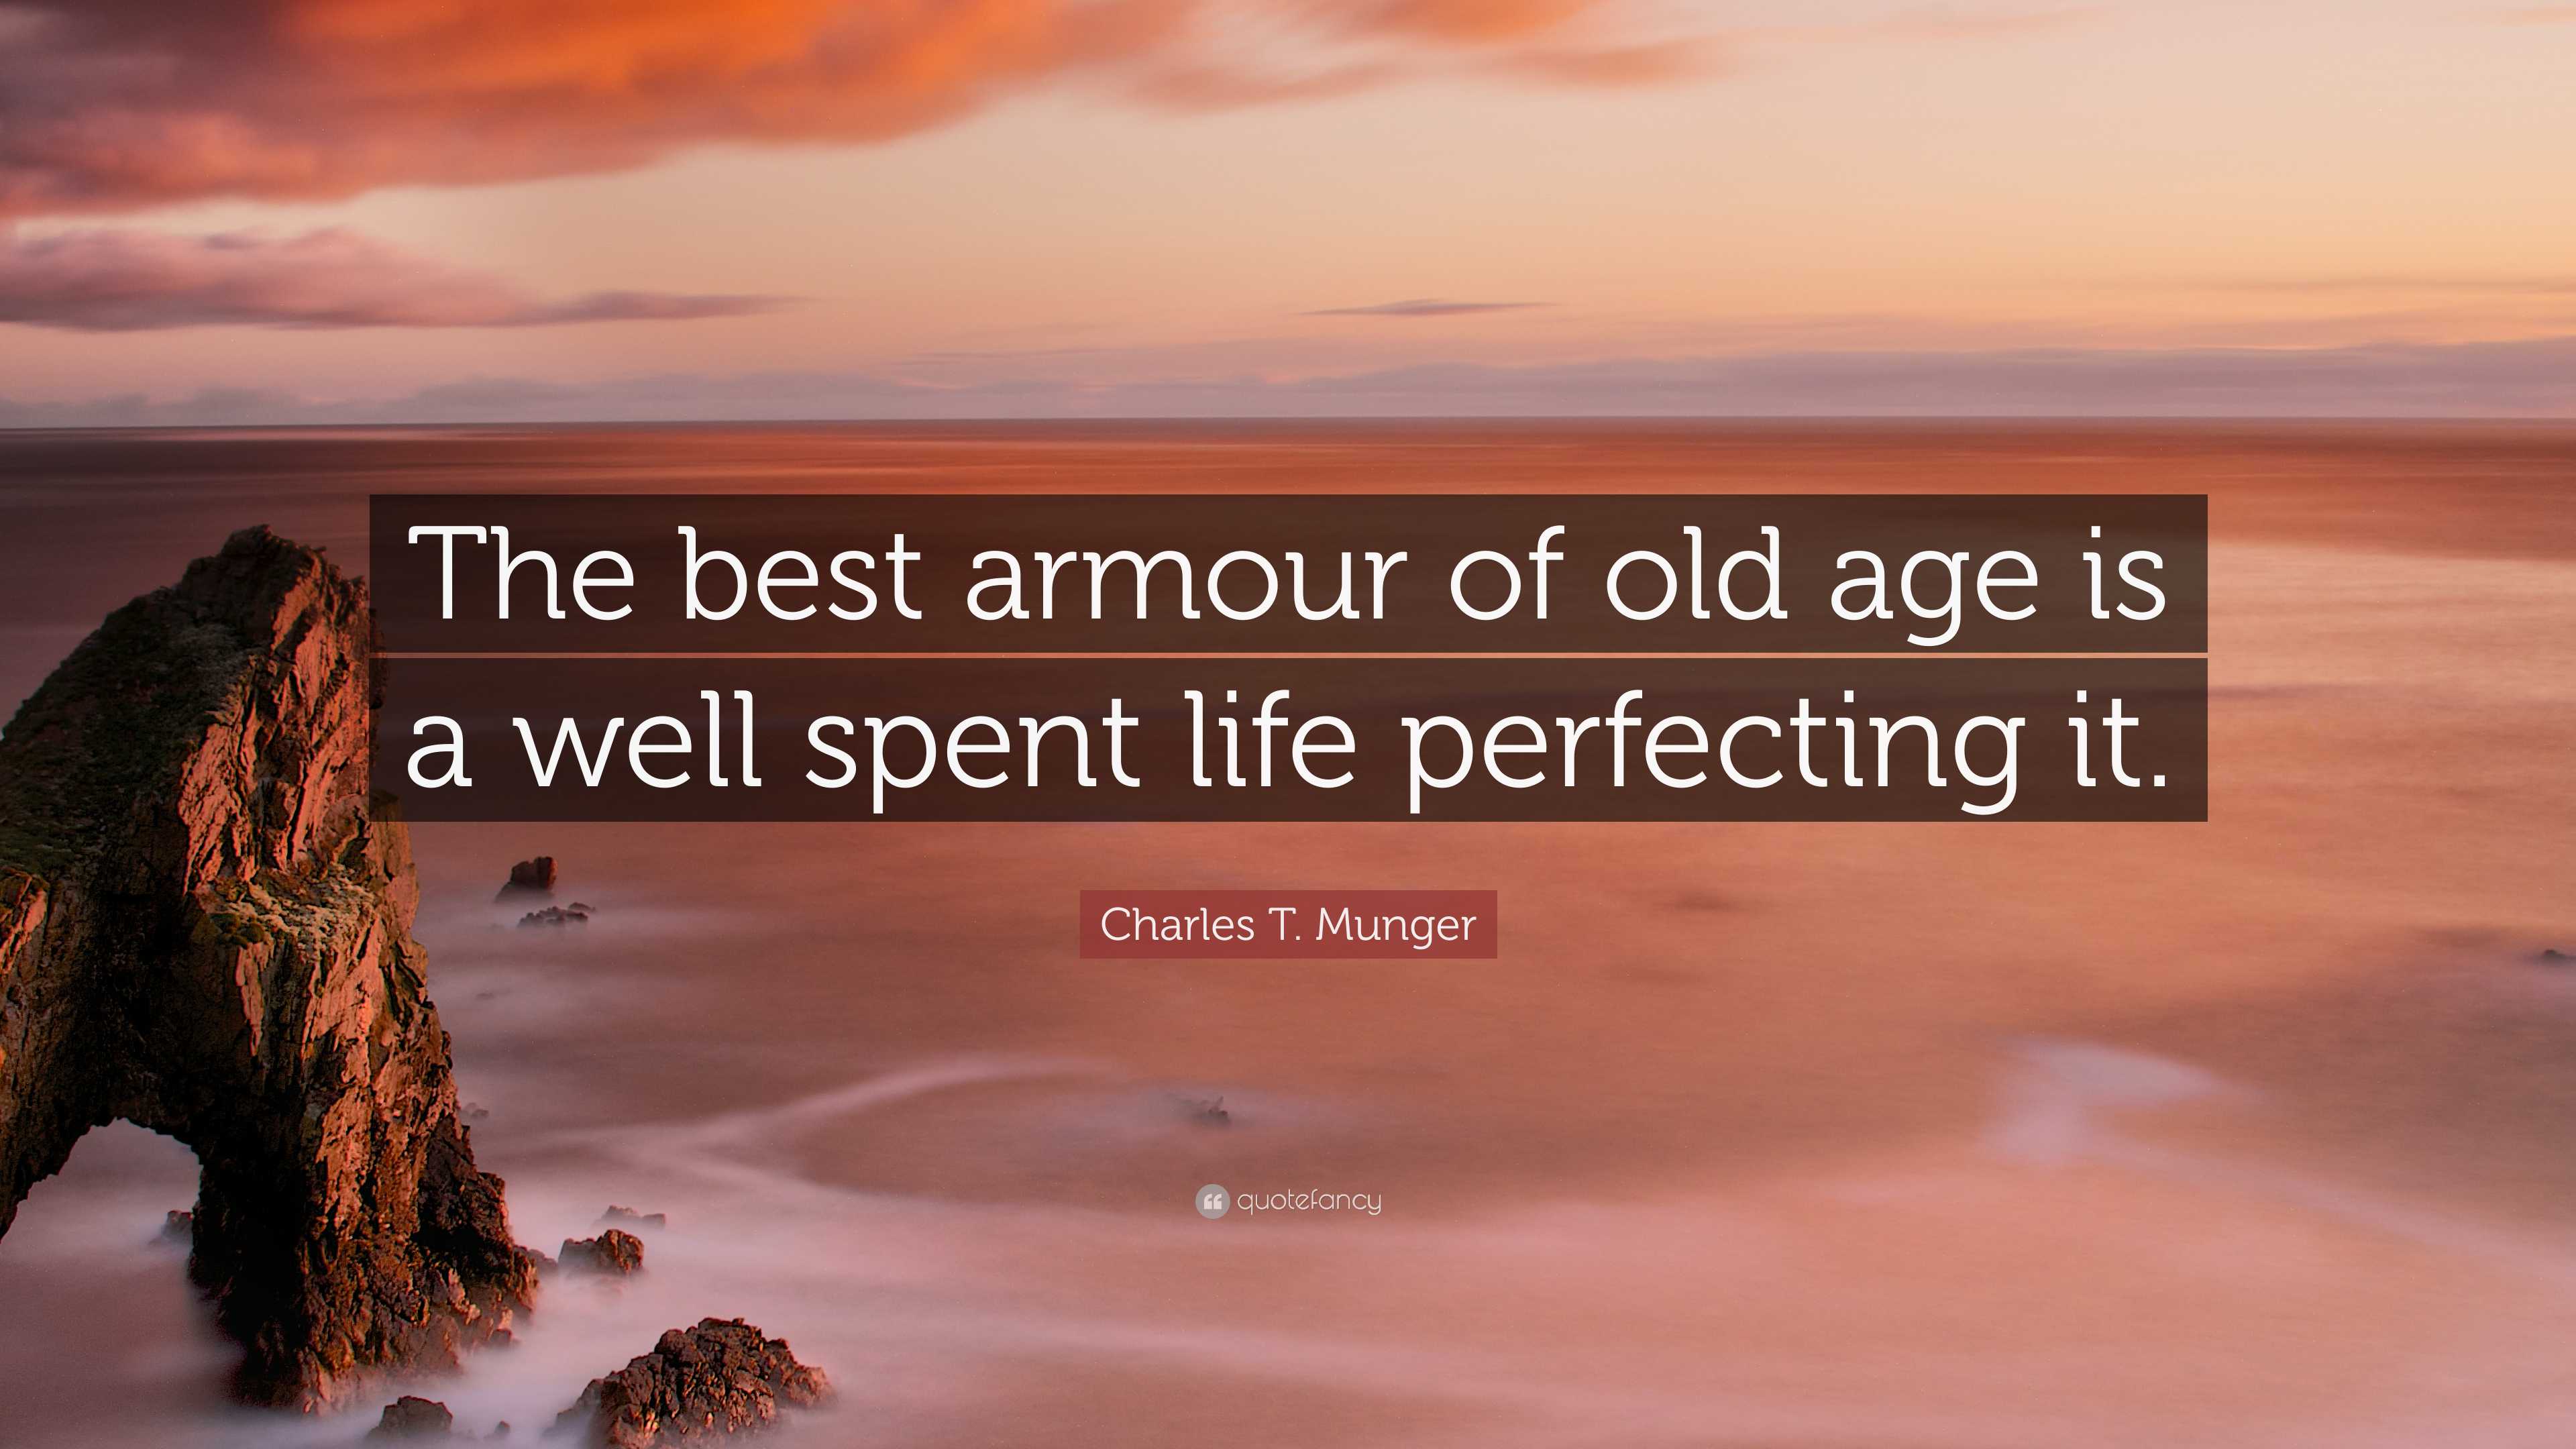 Charles T. Munger Quote: “The best armour of old age is a